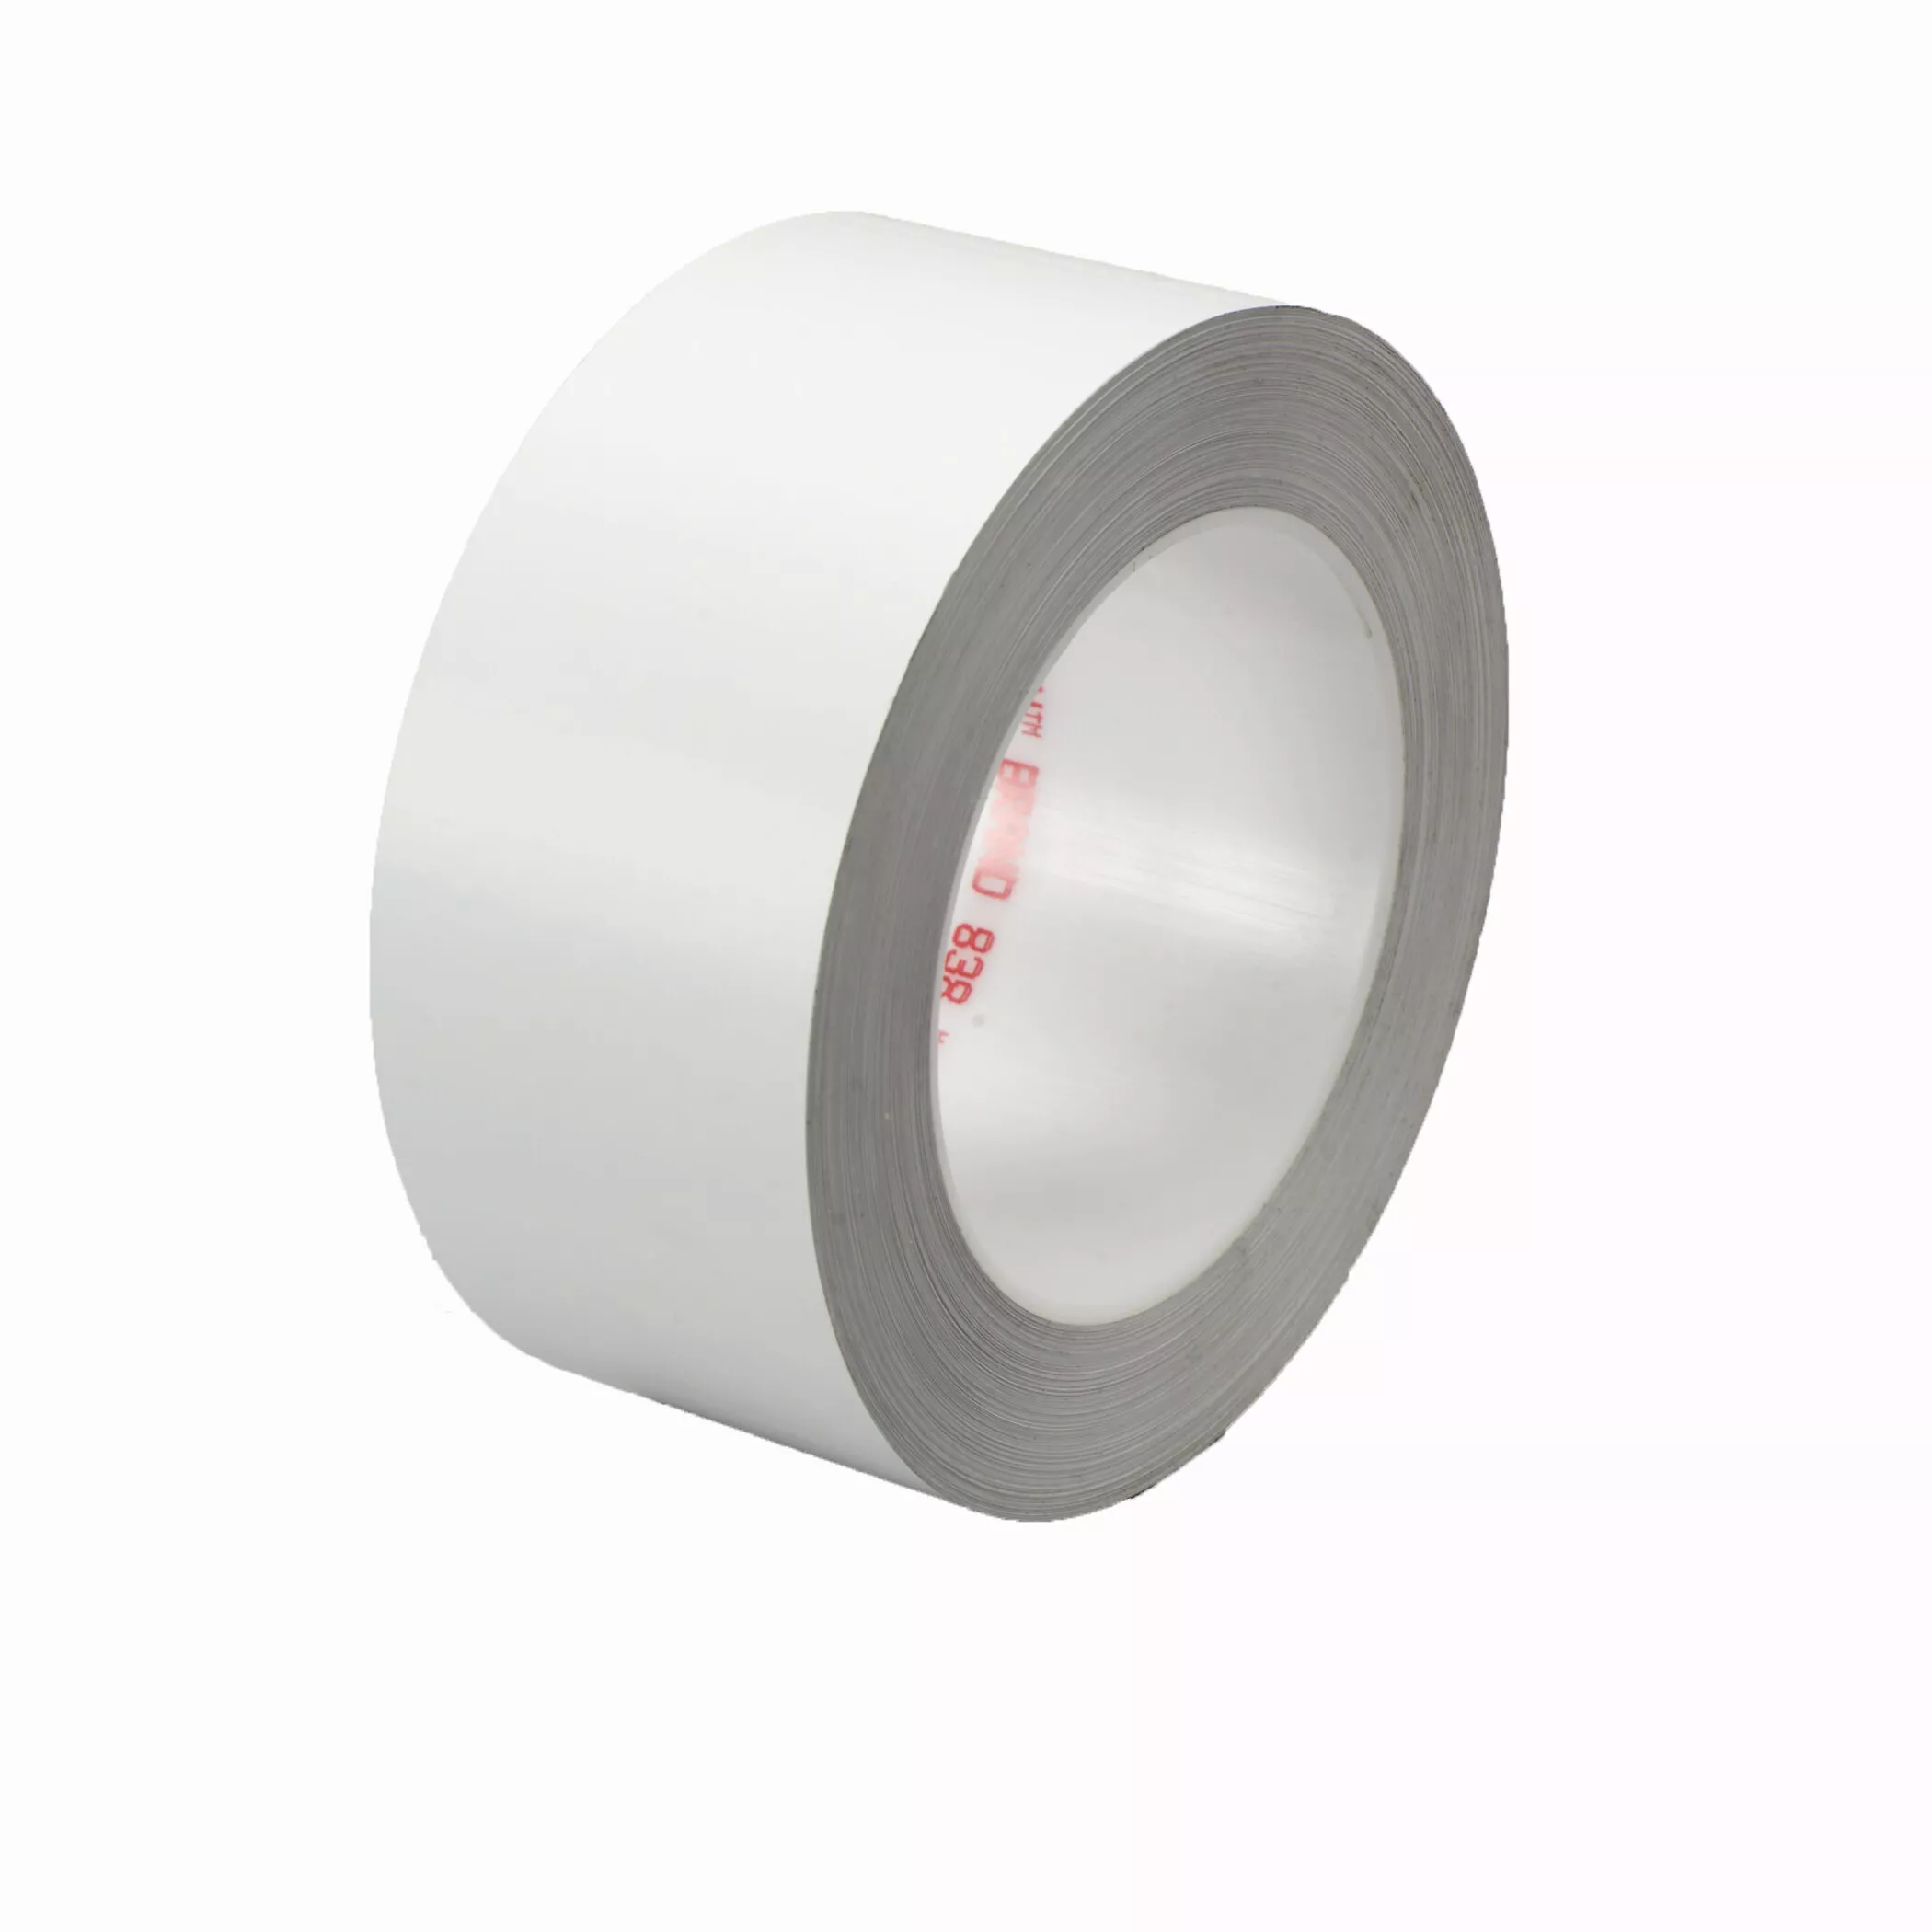 3M™ Weather Resistant Film Tape 838, White, 2 in x 72 yd, 3.4 mil, 24
Roll/Case